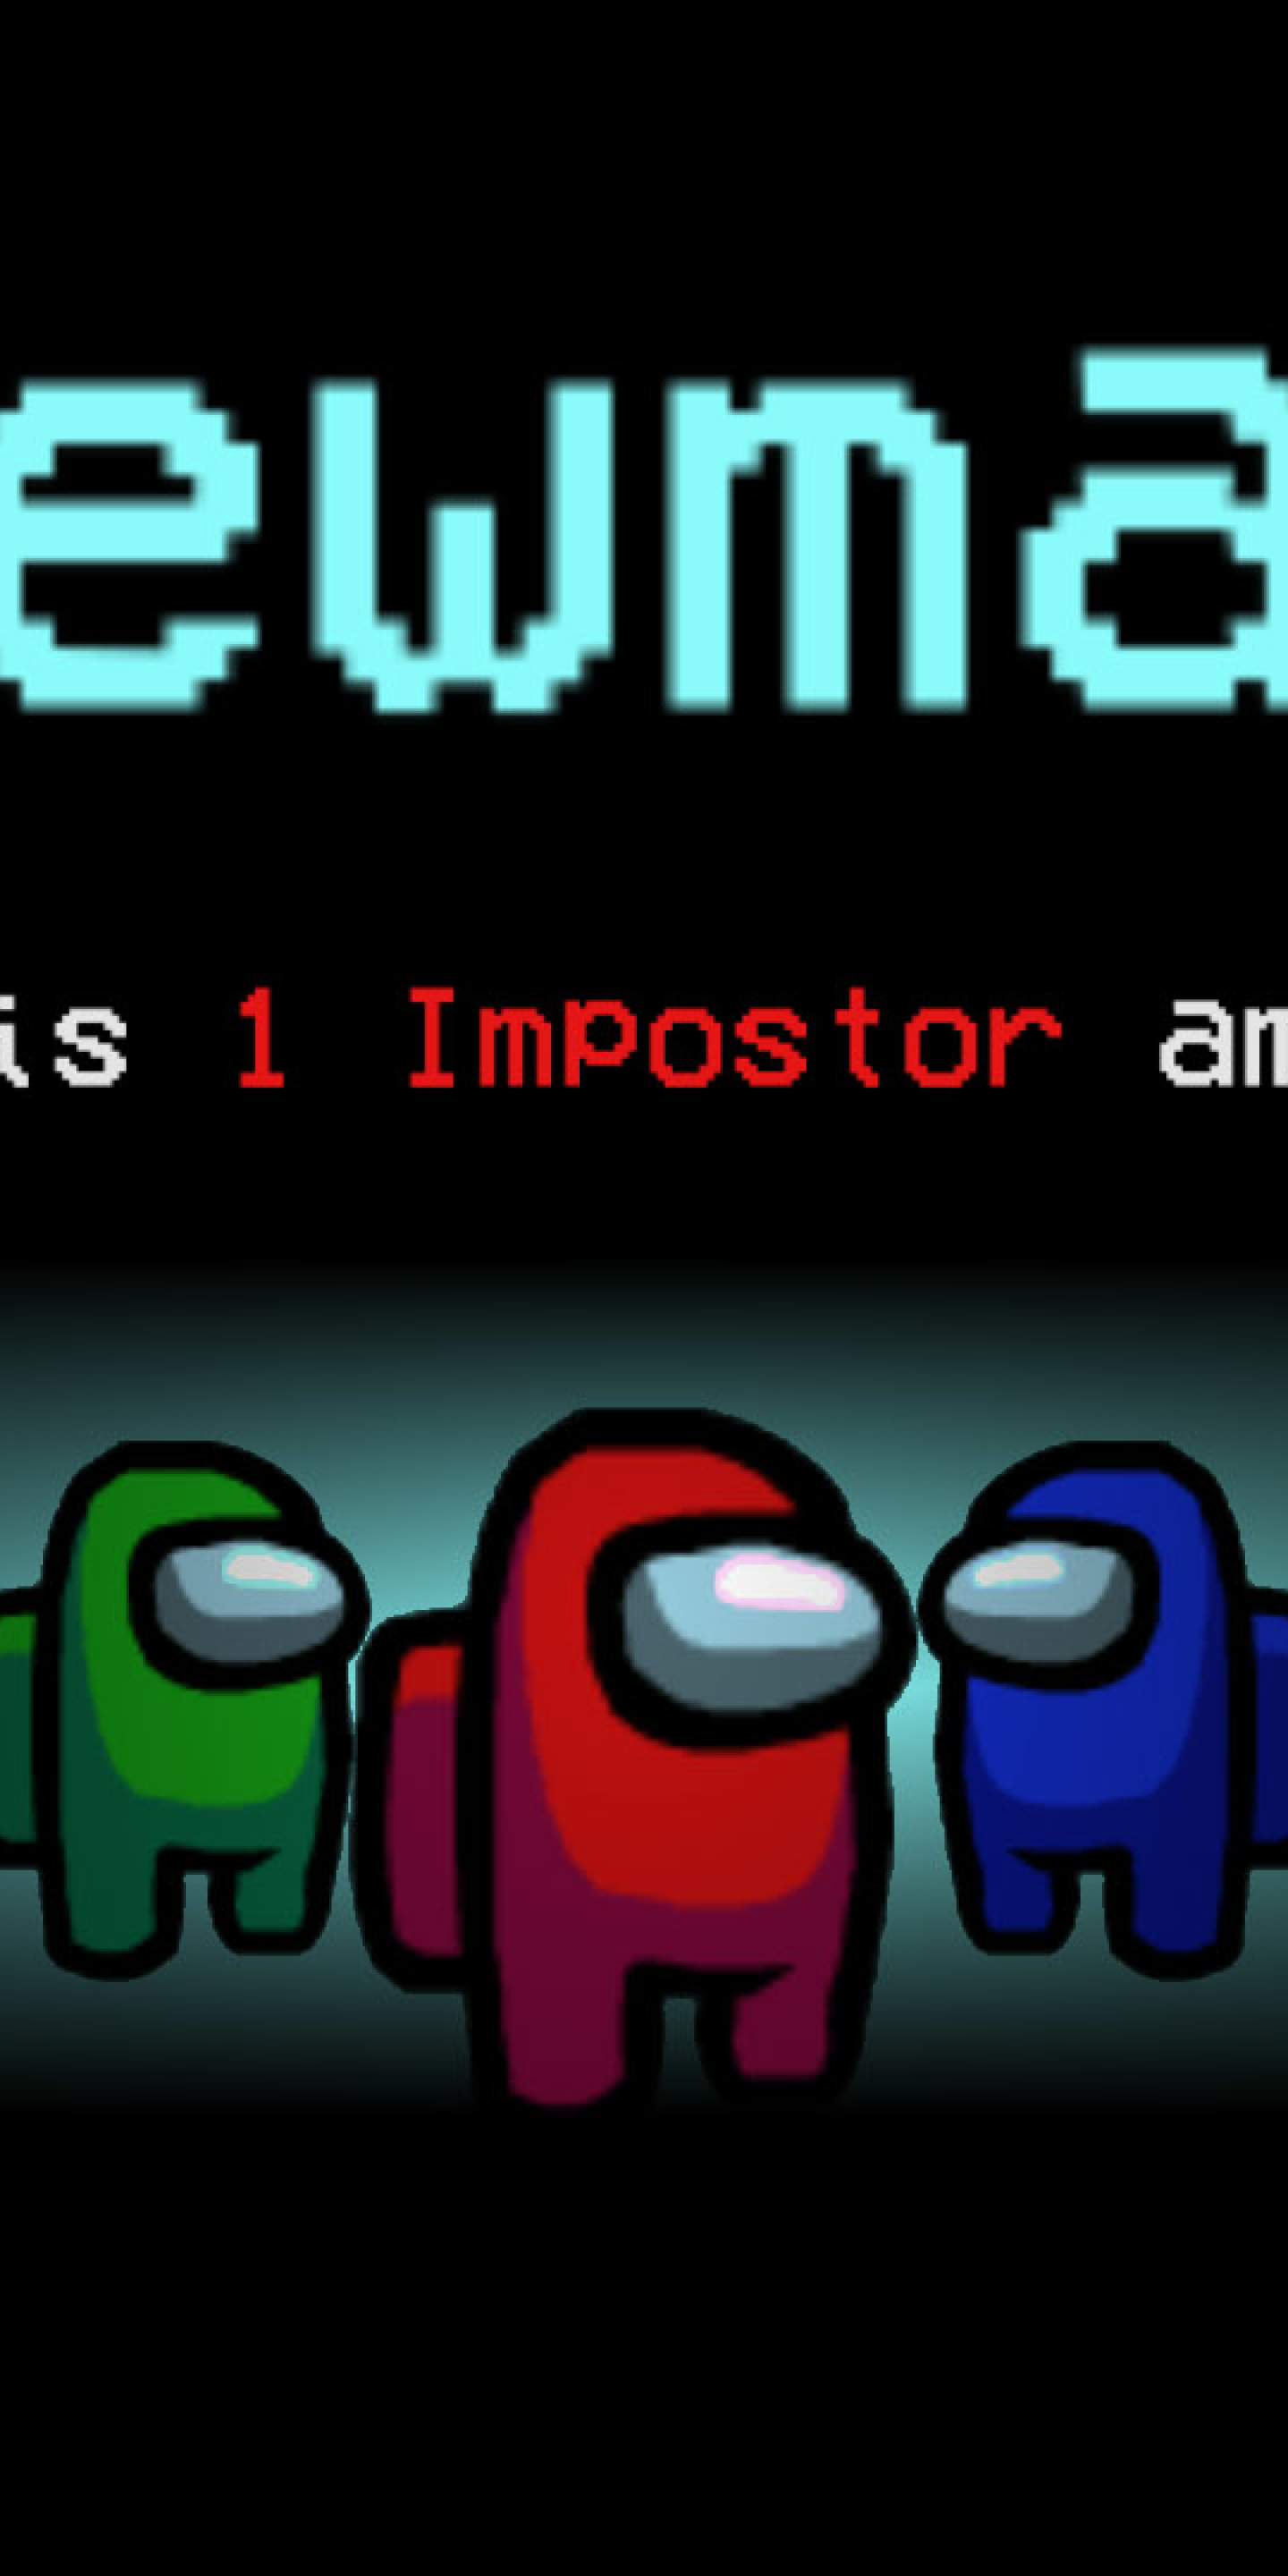 1440x2880 There Is 1 Imposter Crewmate Among Us 1440x2880 Resolution